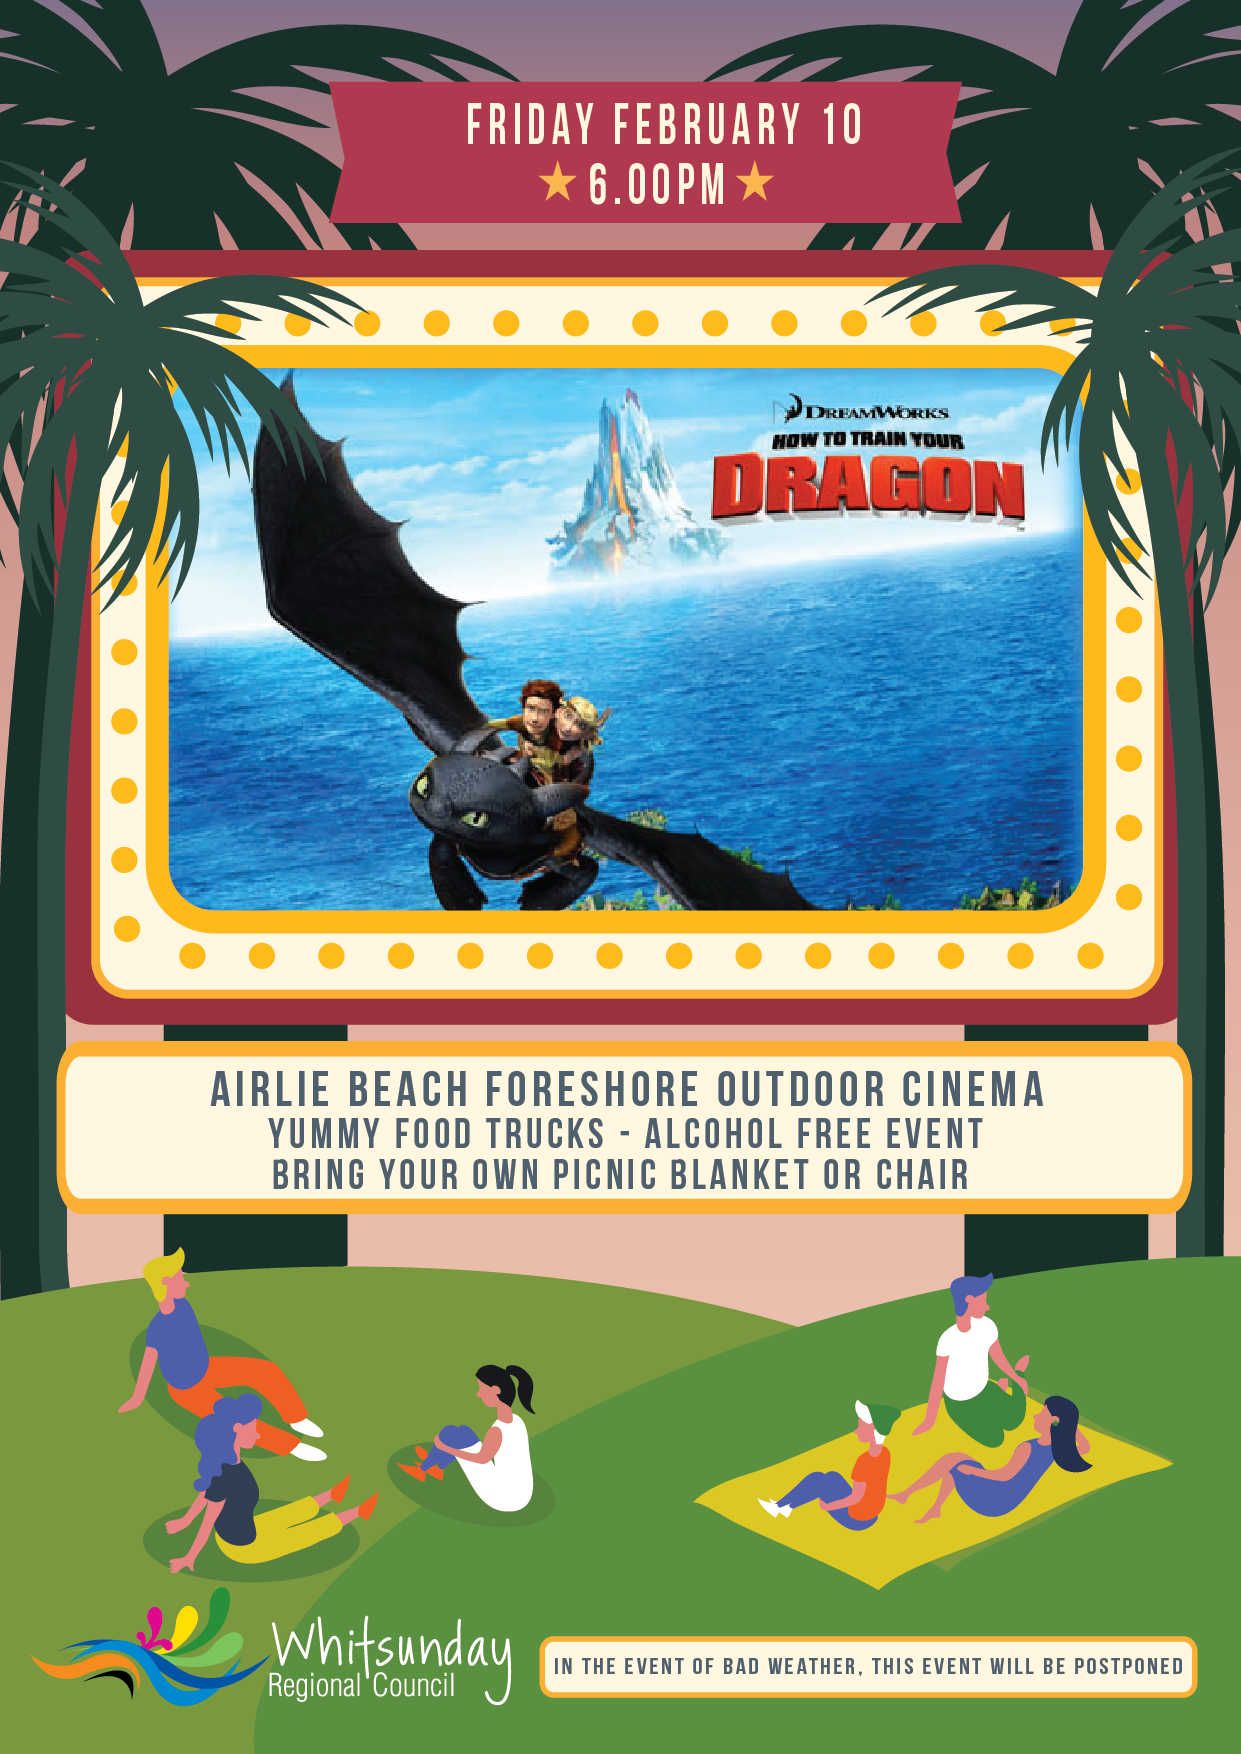 How to train your dragon 10 feb 01